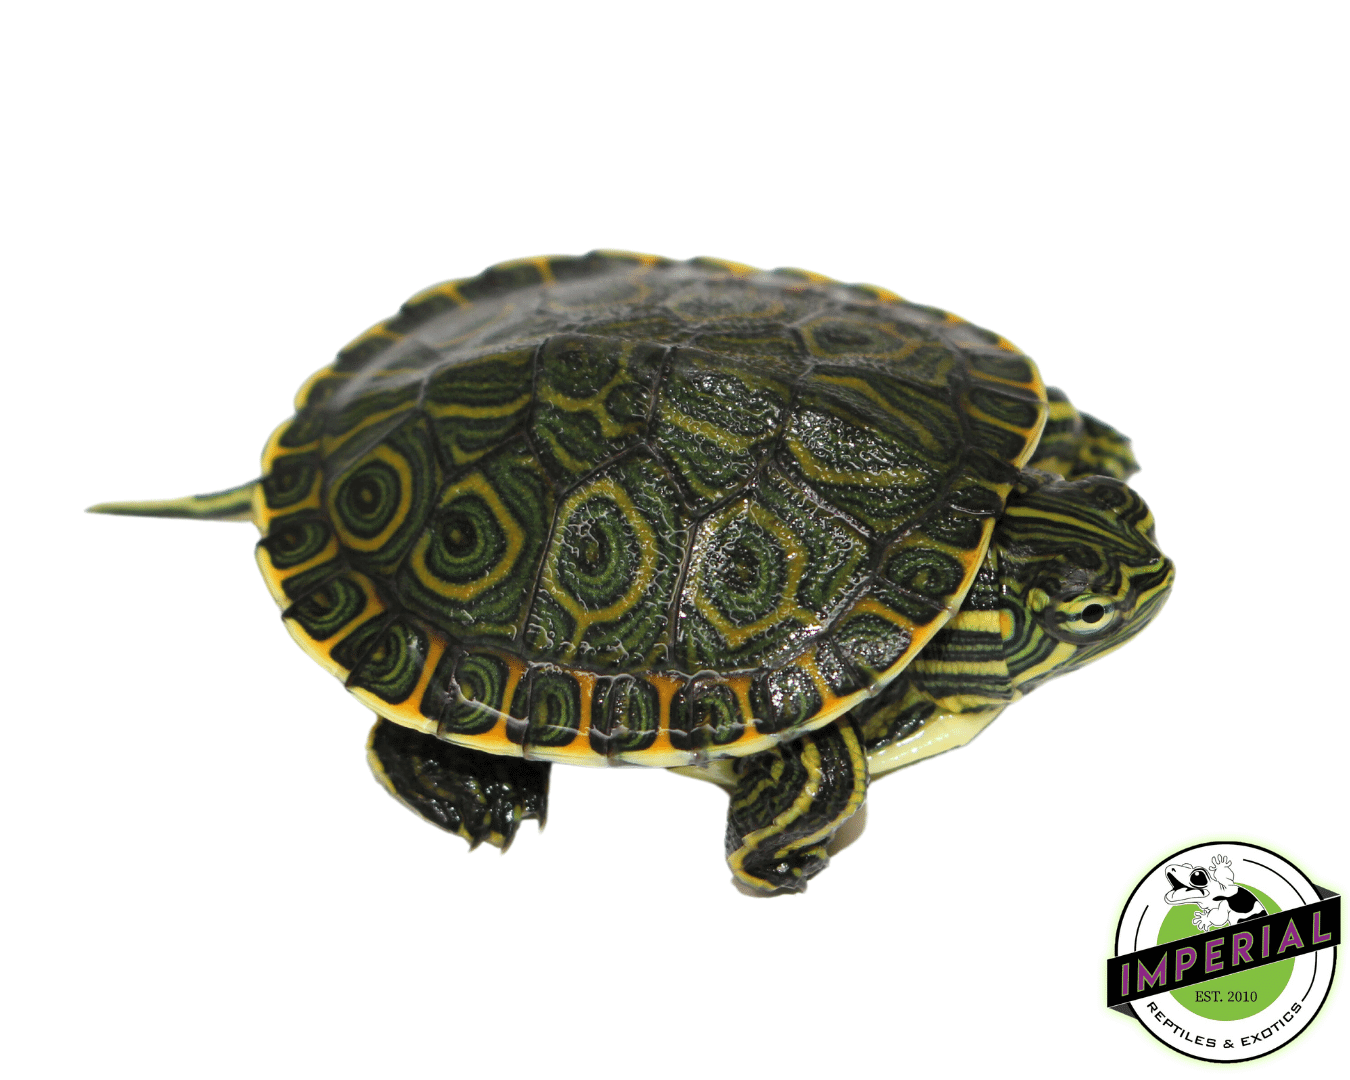 nicaraguan slider turtle for sale, buy turtles online at cheap prices